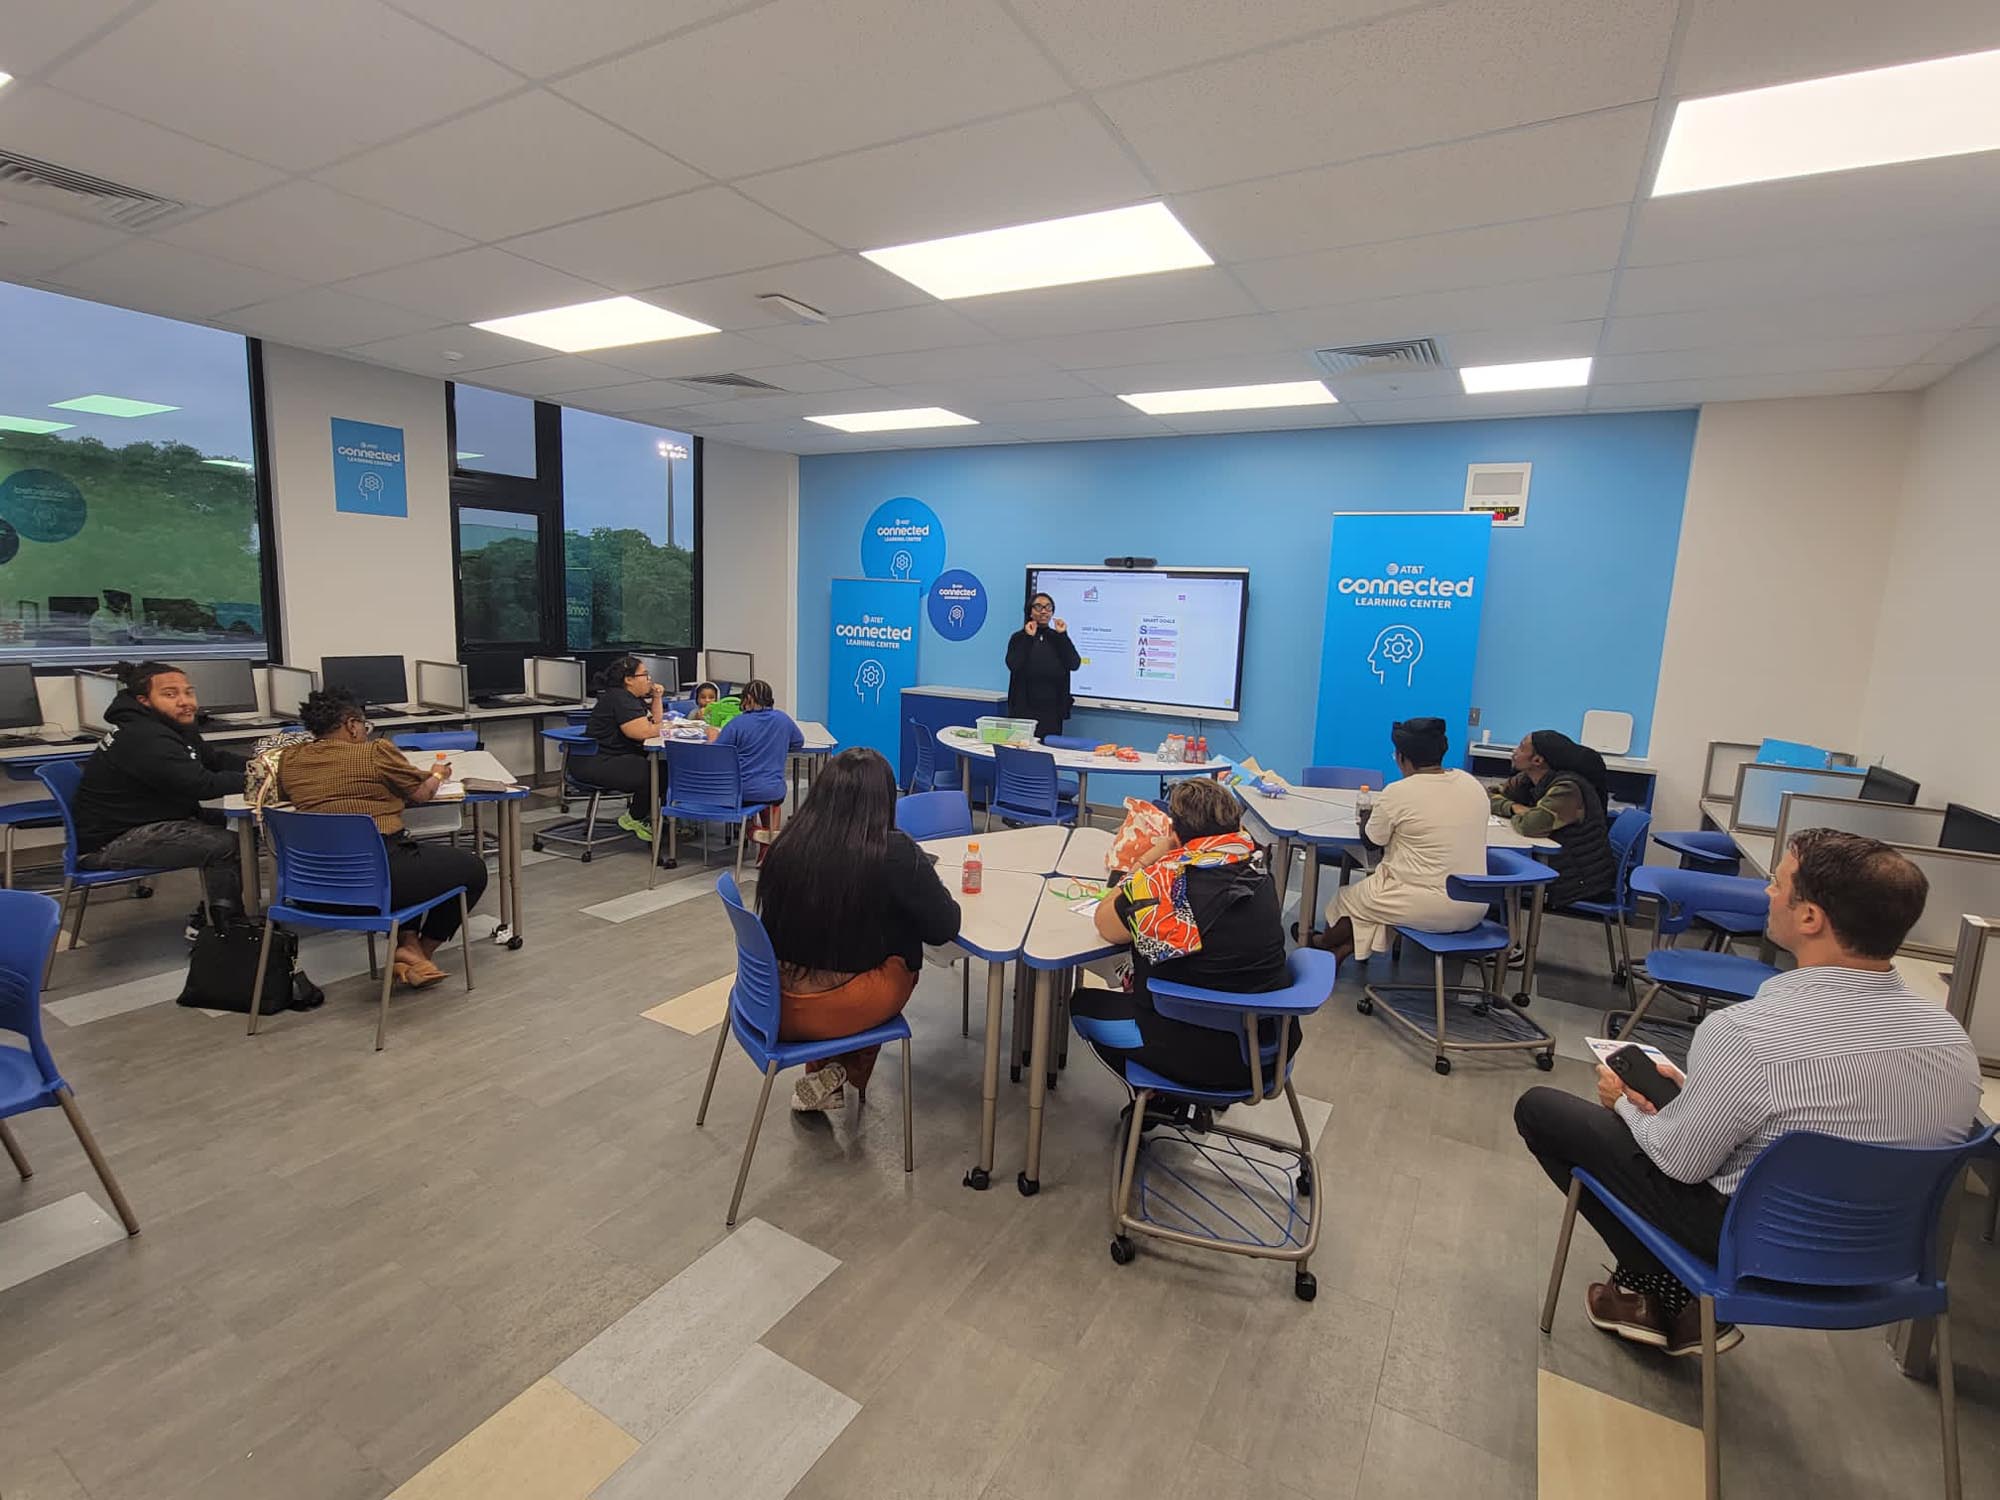 OYC Miami hosts its “Build Your Own Business” Workshop series in the AT&T Connected Learning Center.